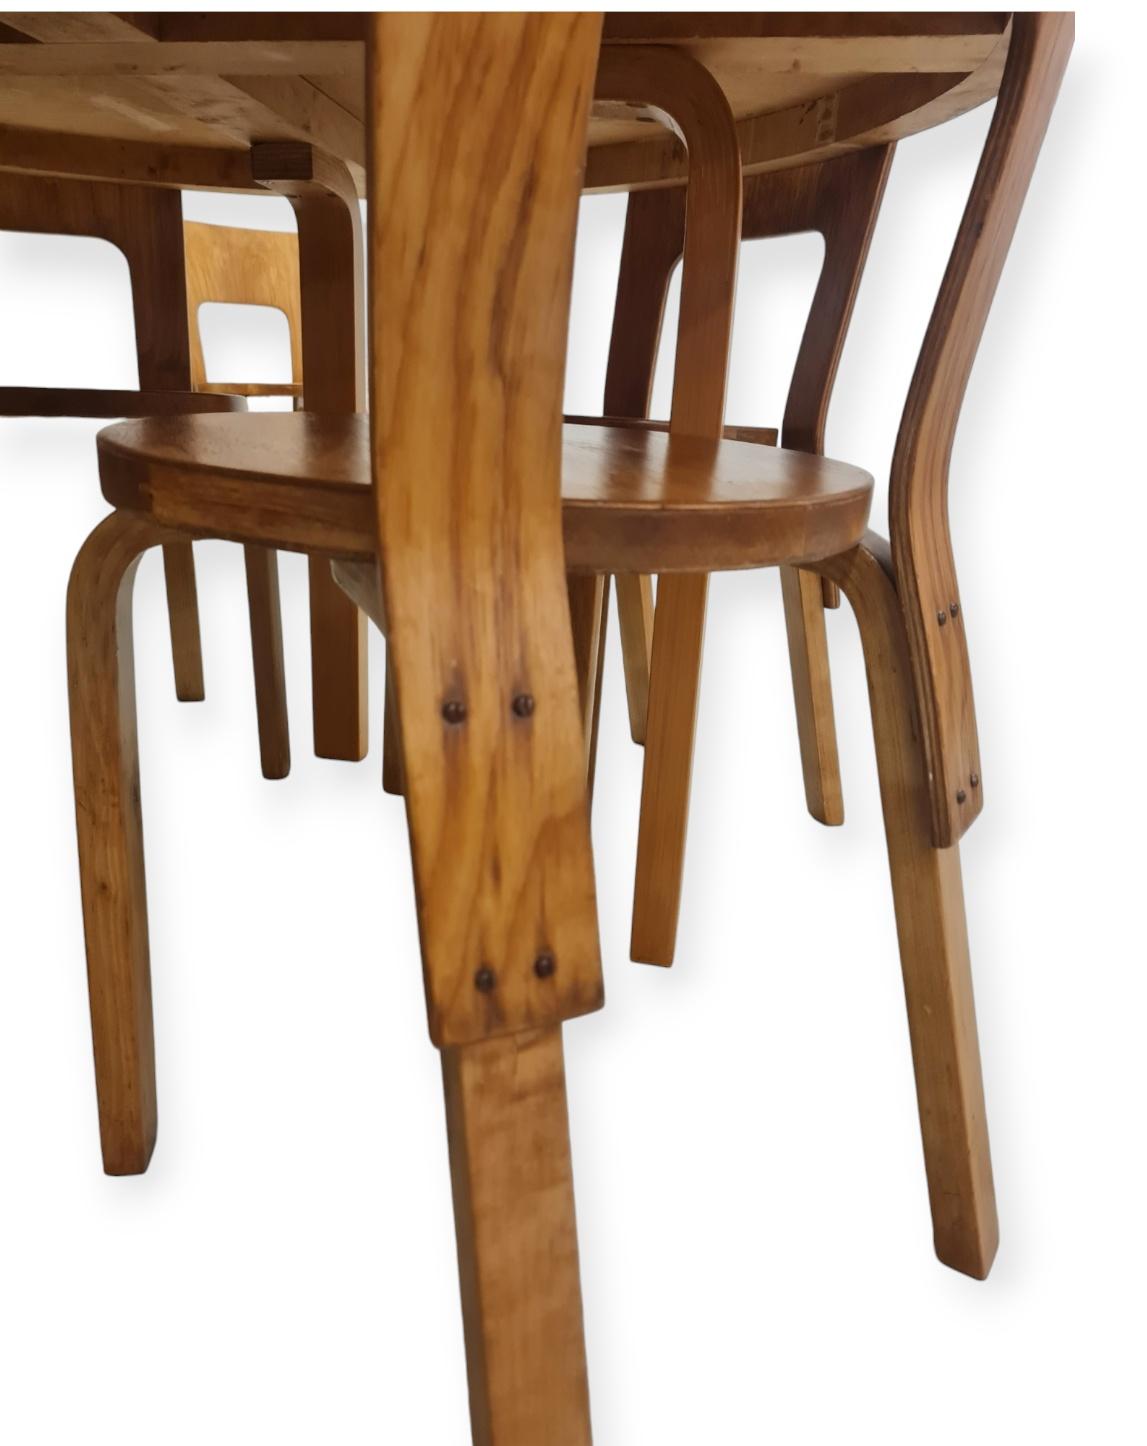 Alvar Aalto Dinning Set with Lazy Susan and 6 Model 66 chairs, 1940s In Good Condition For Sale In Helsinki, FI